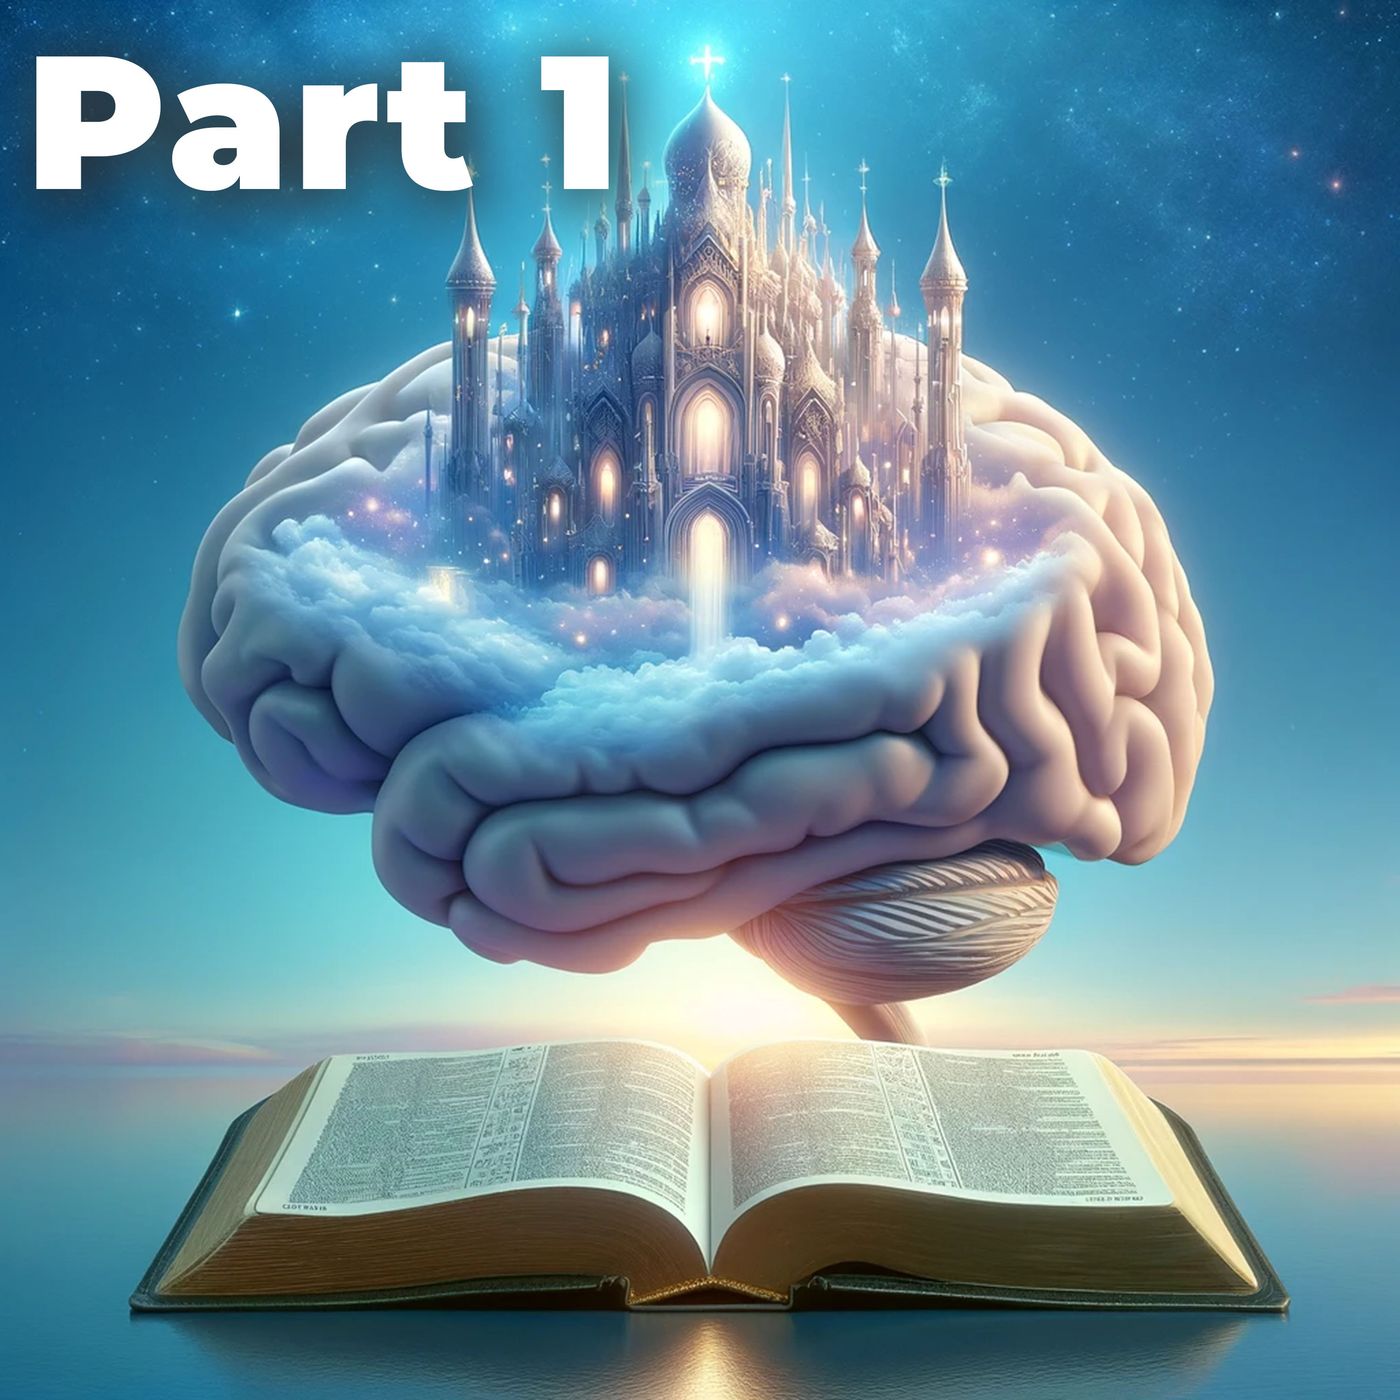 How to Create a Bible Memory Mind Palace for Beginners (Part 1)